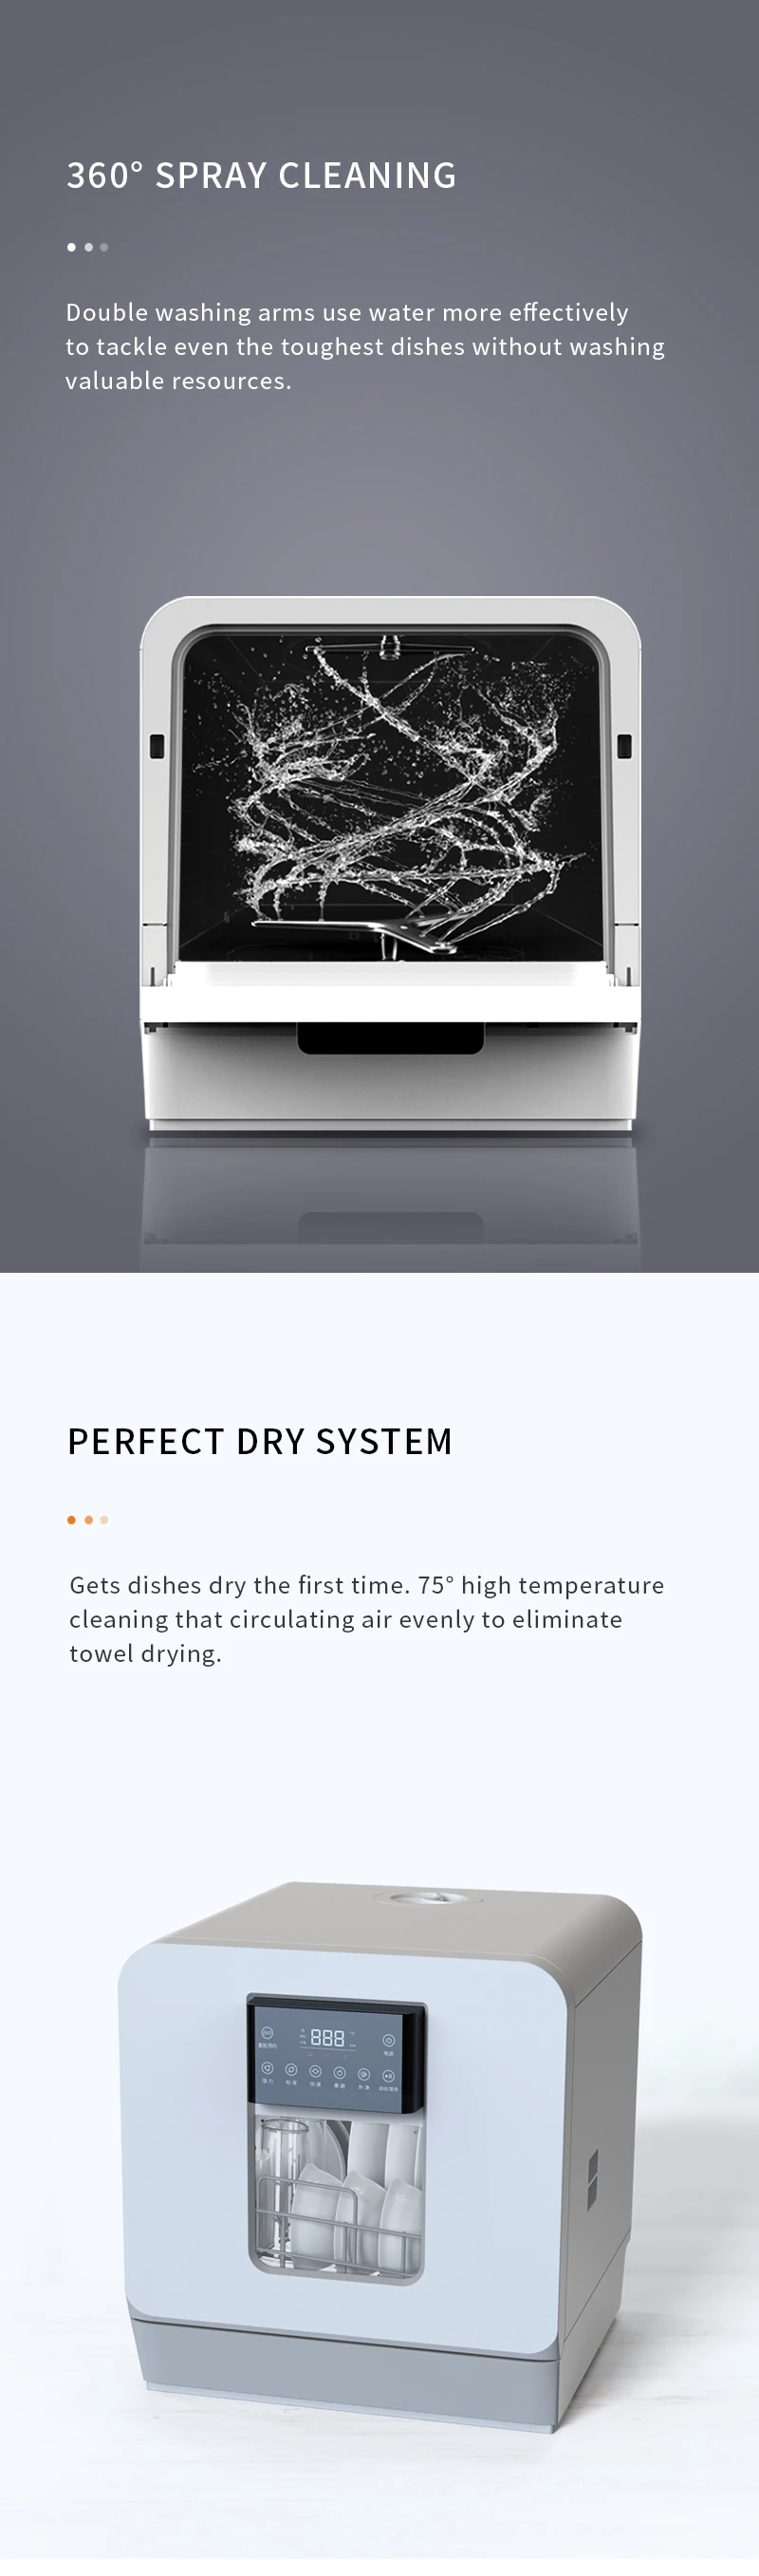 Dish washer Kitchen household appliances Smart mini dish Washing machine Mini Dish Washer Machine for home